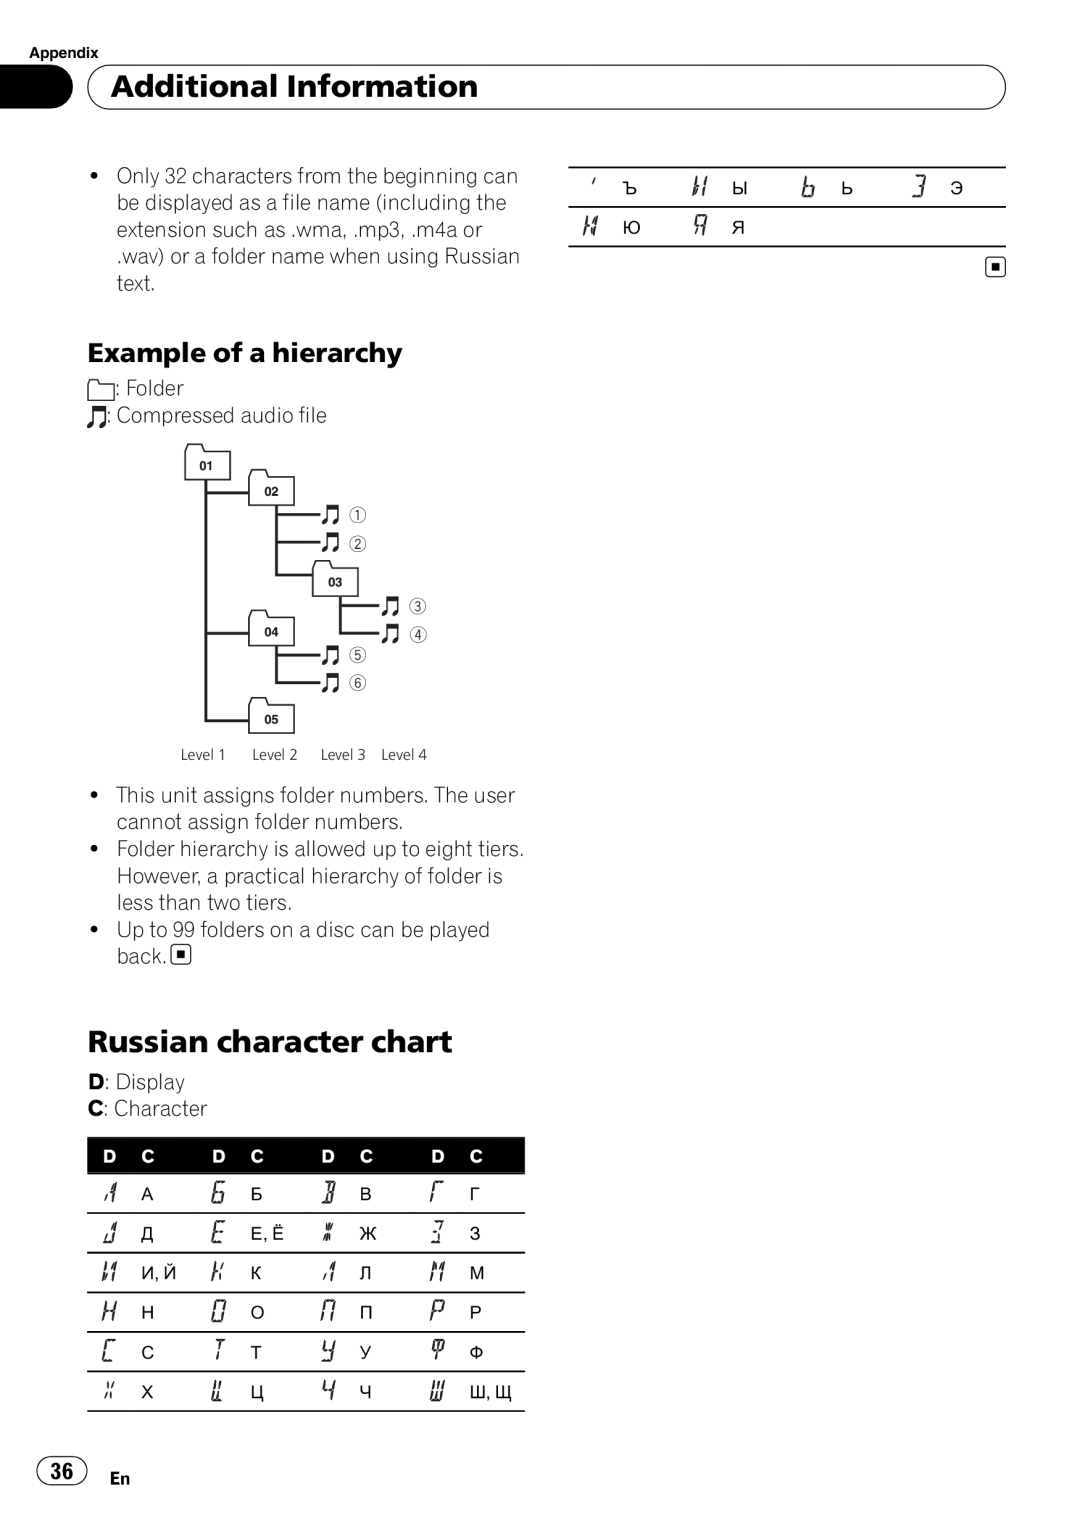 Pioneer DEH-50UB operation manual Russian character chart, Example of a hierarchy, Additional Information 